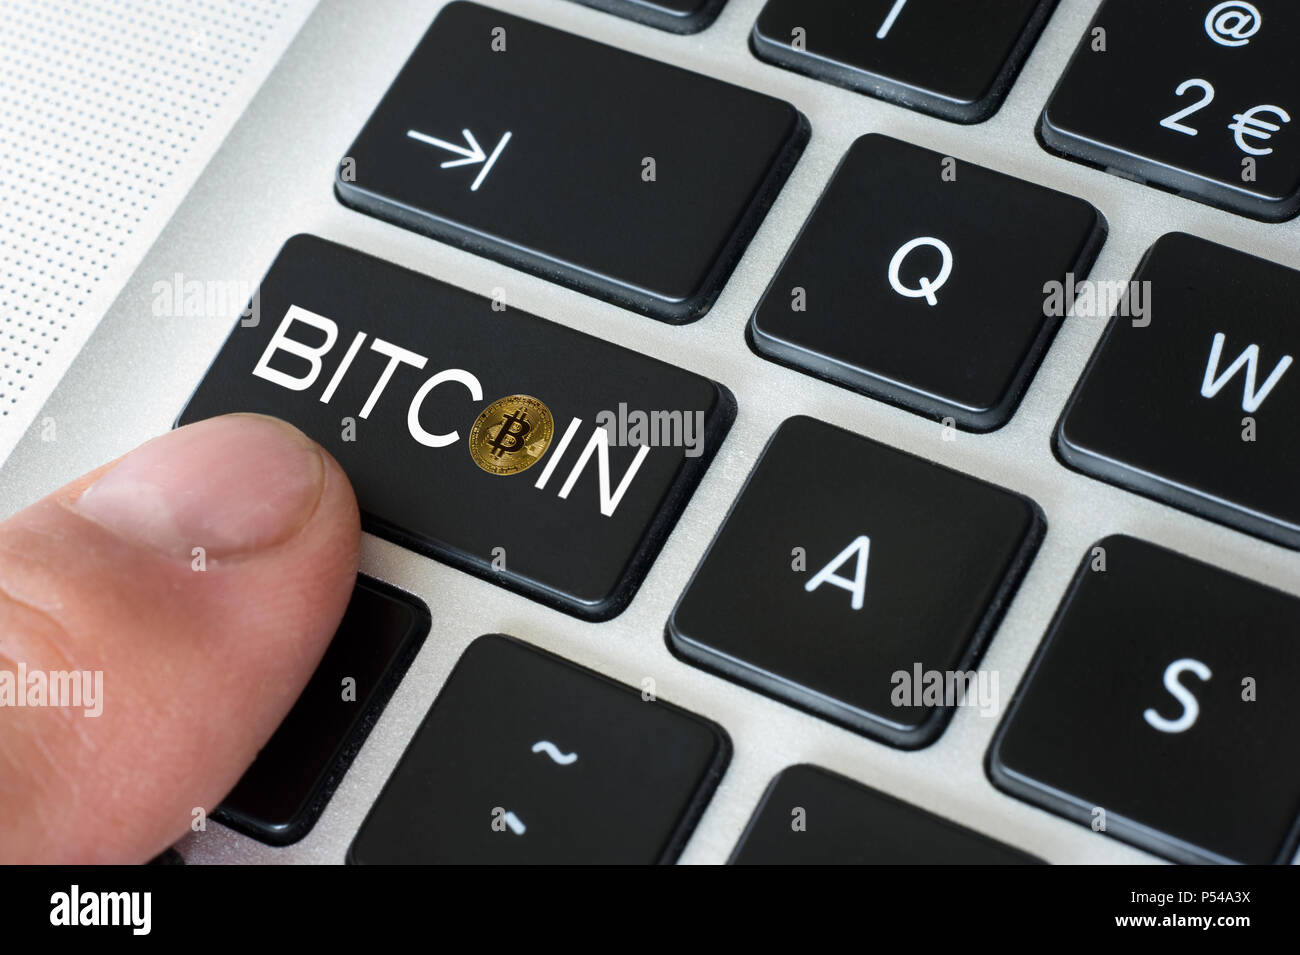 Bitcoin in one of the keys of the keyboard of a computer Stock Photo